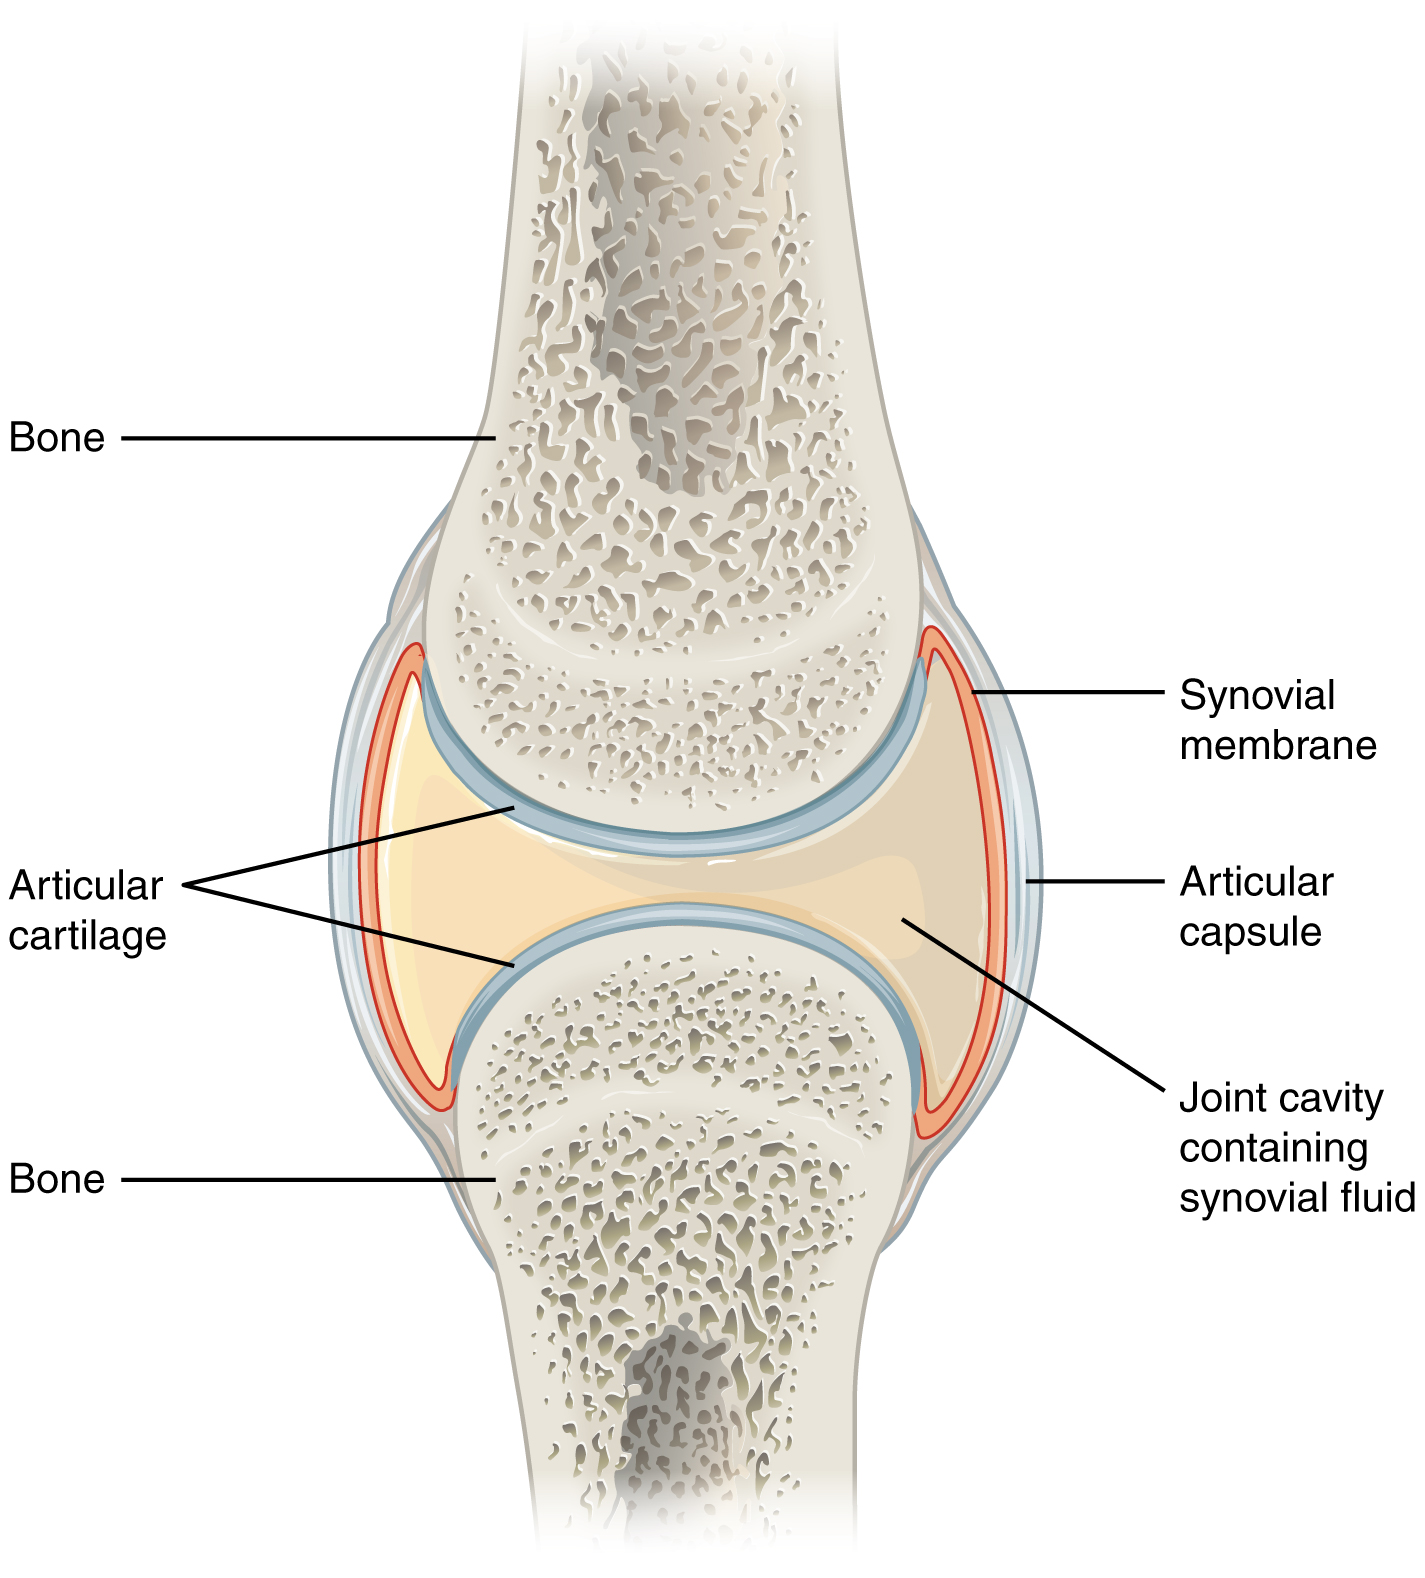 11.6.2 Synovial Joint